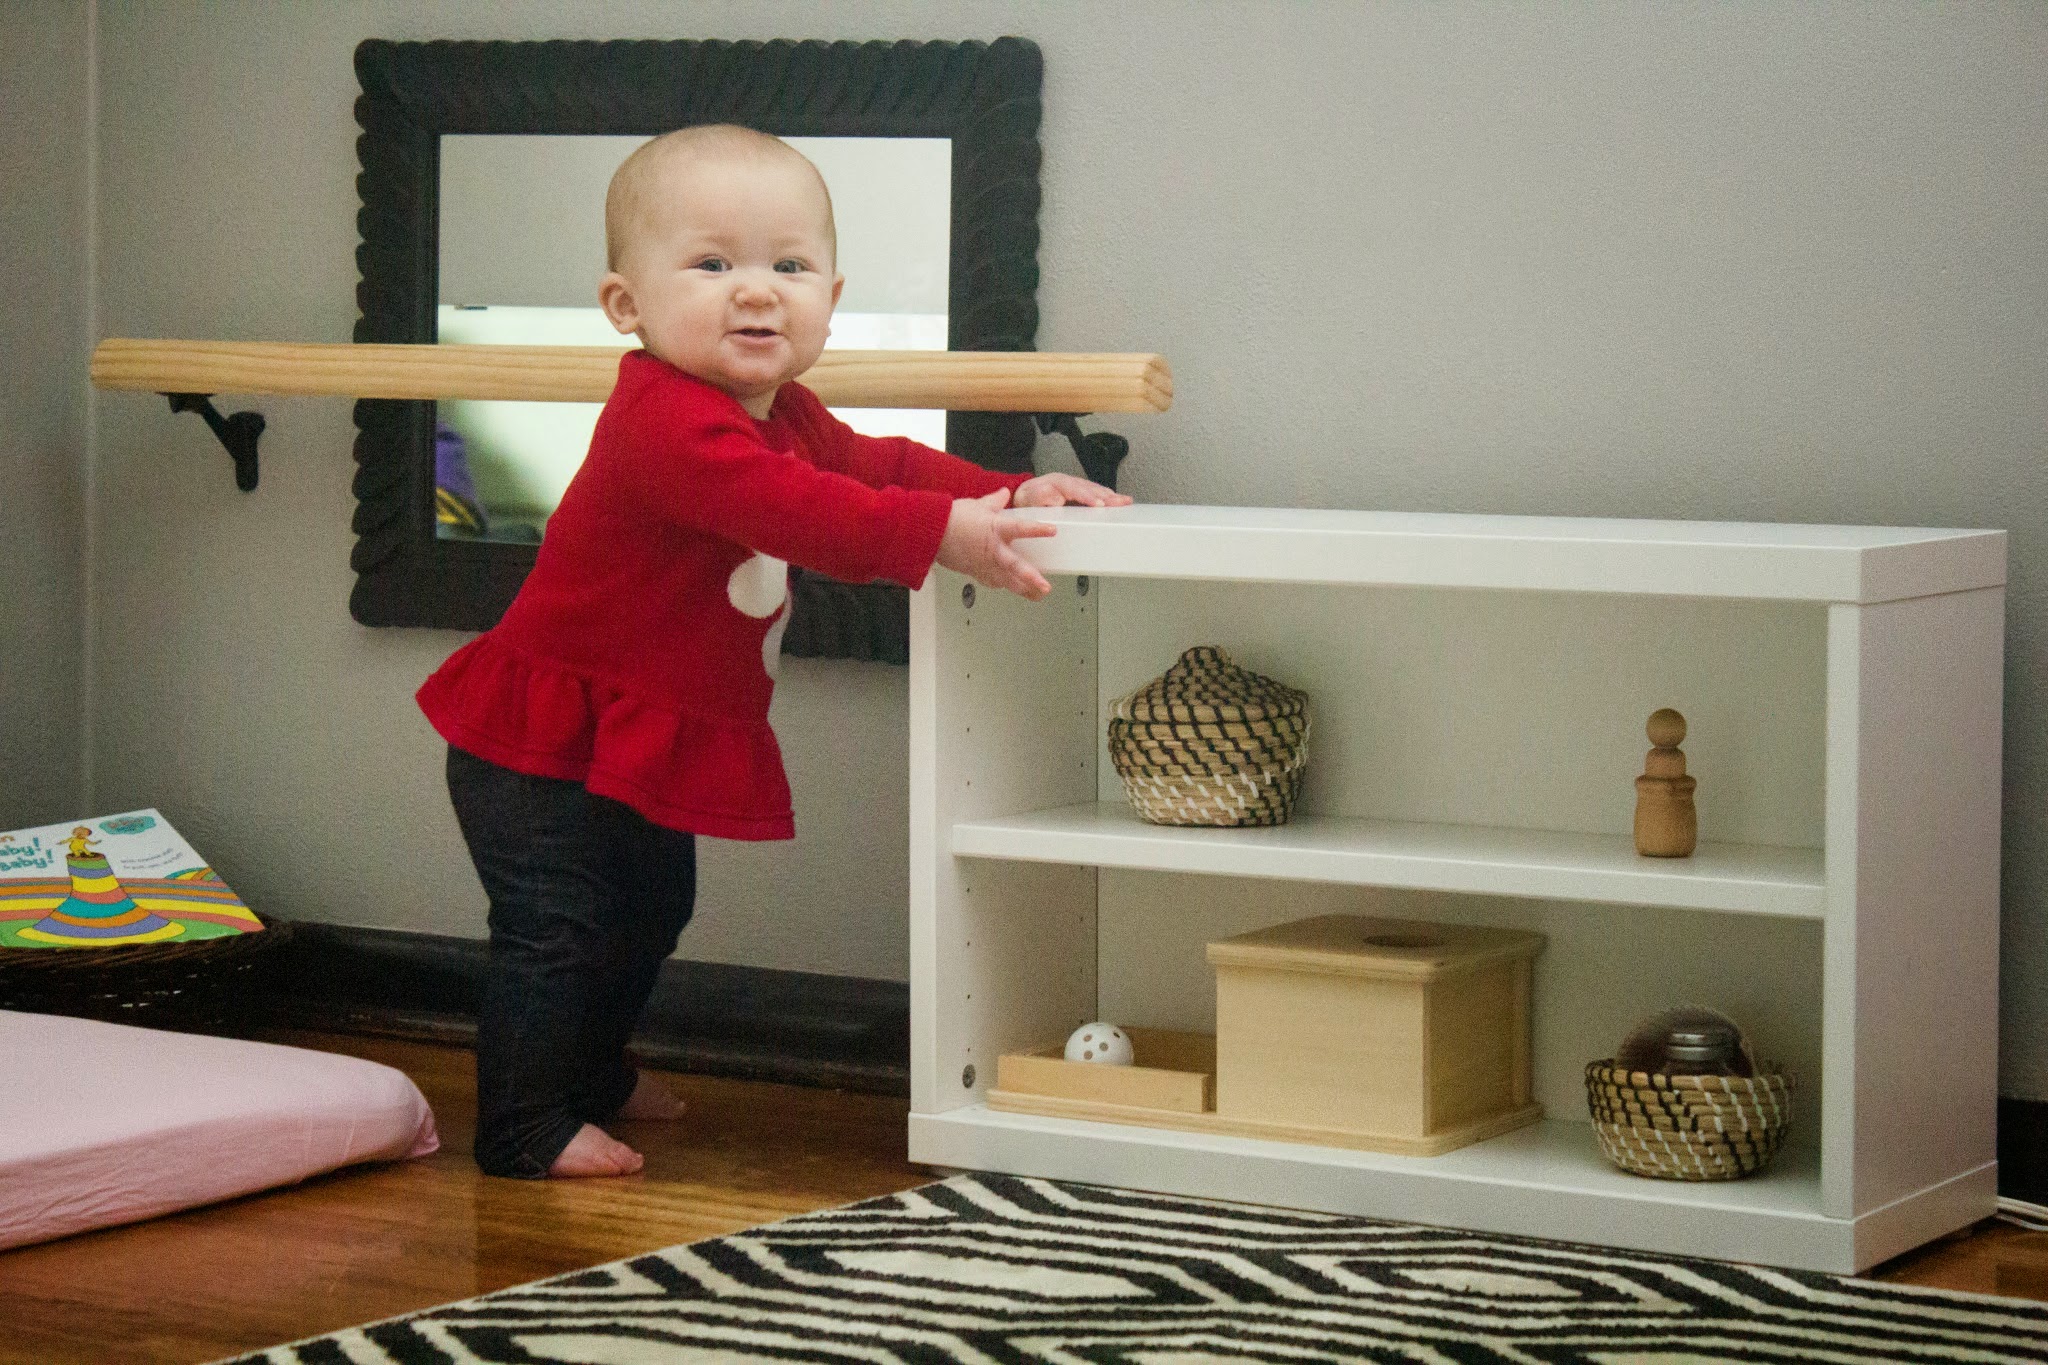 Montessori baby moves from pull-up bar to standing at shelf, she smiles to the camera as she is proud of her new movements.